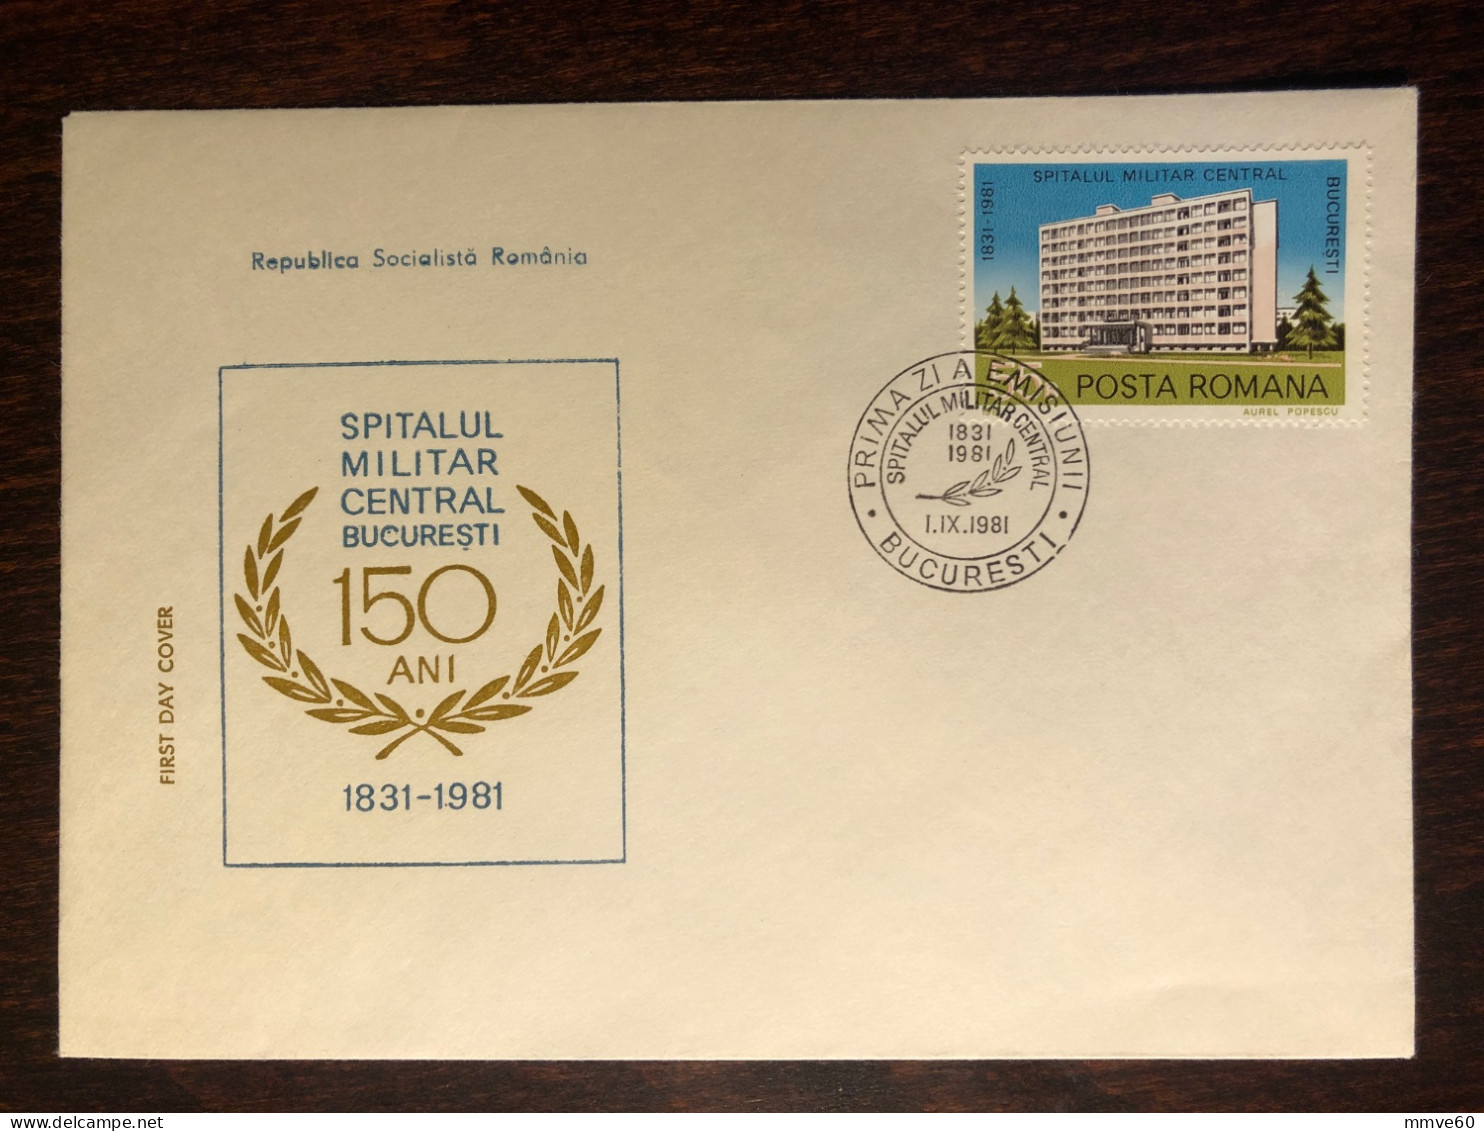 ROMANIA FDC COVER 1981 YEAR MILITARY HOSPITAL HEALTH MEDICINE STAMPS - FDC